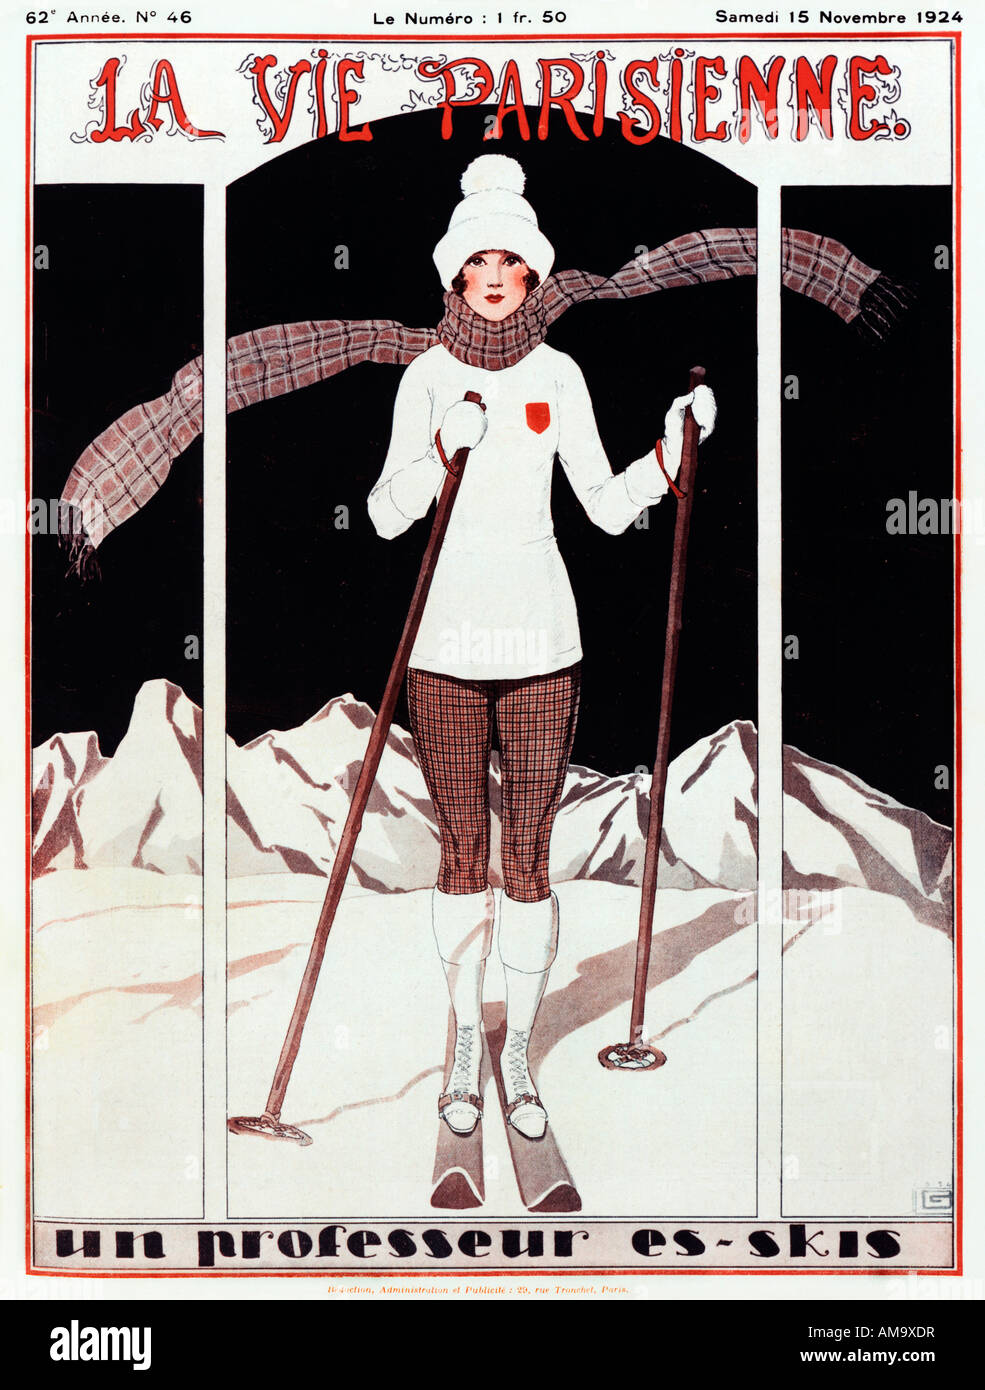 Professeur Es Skis French 1920s illustration of a lady skier on the cover of magazine La Vie Parisienne Stock Photo